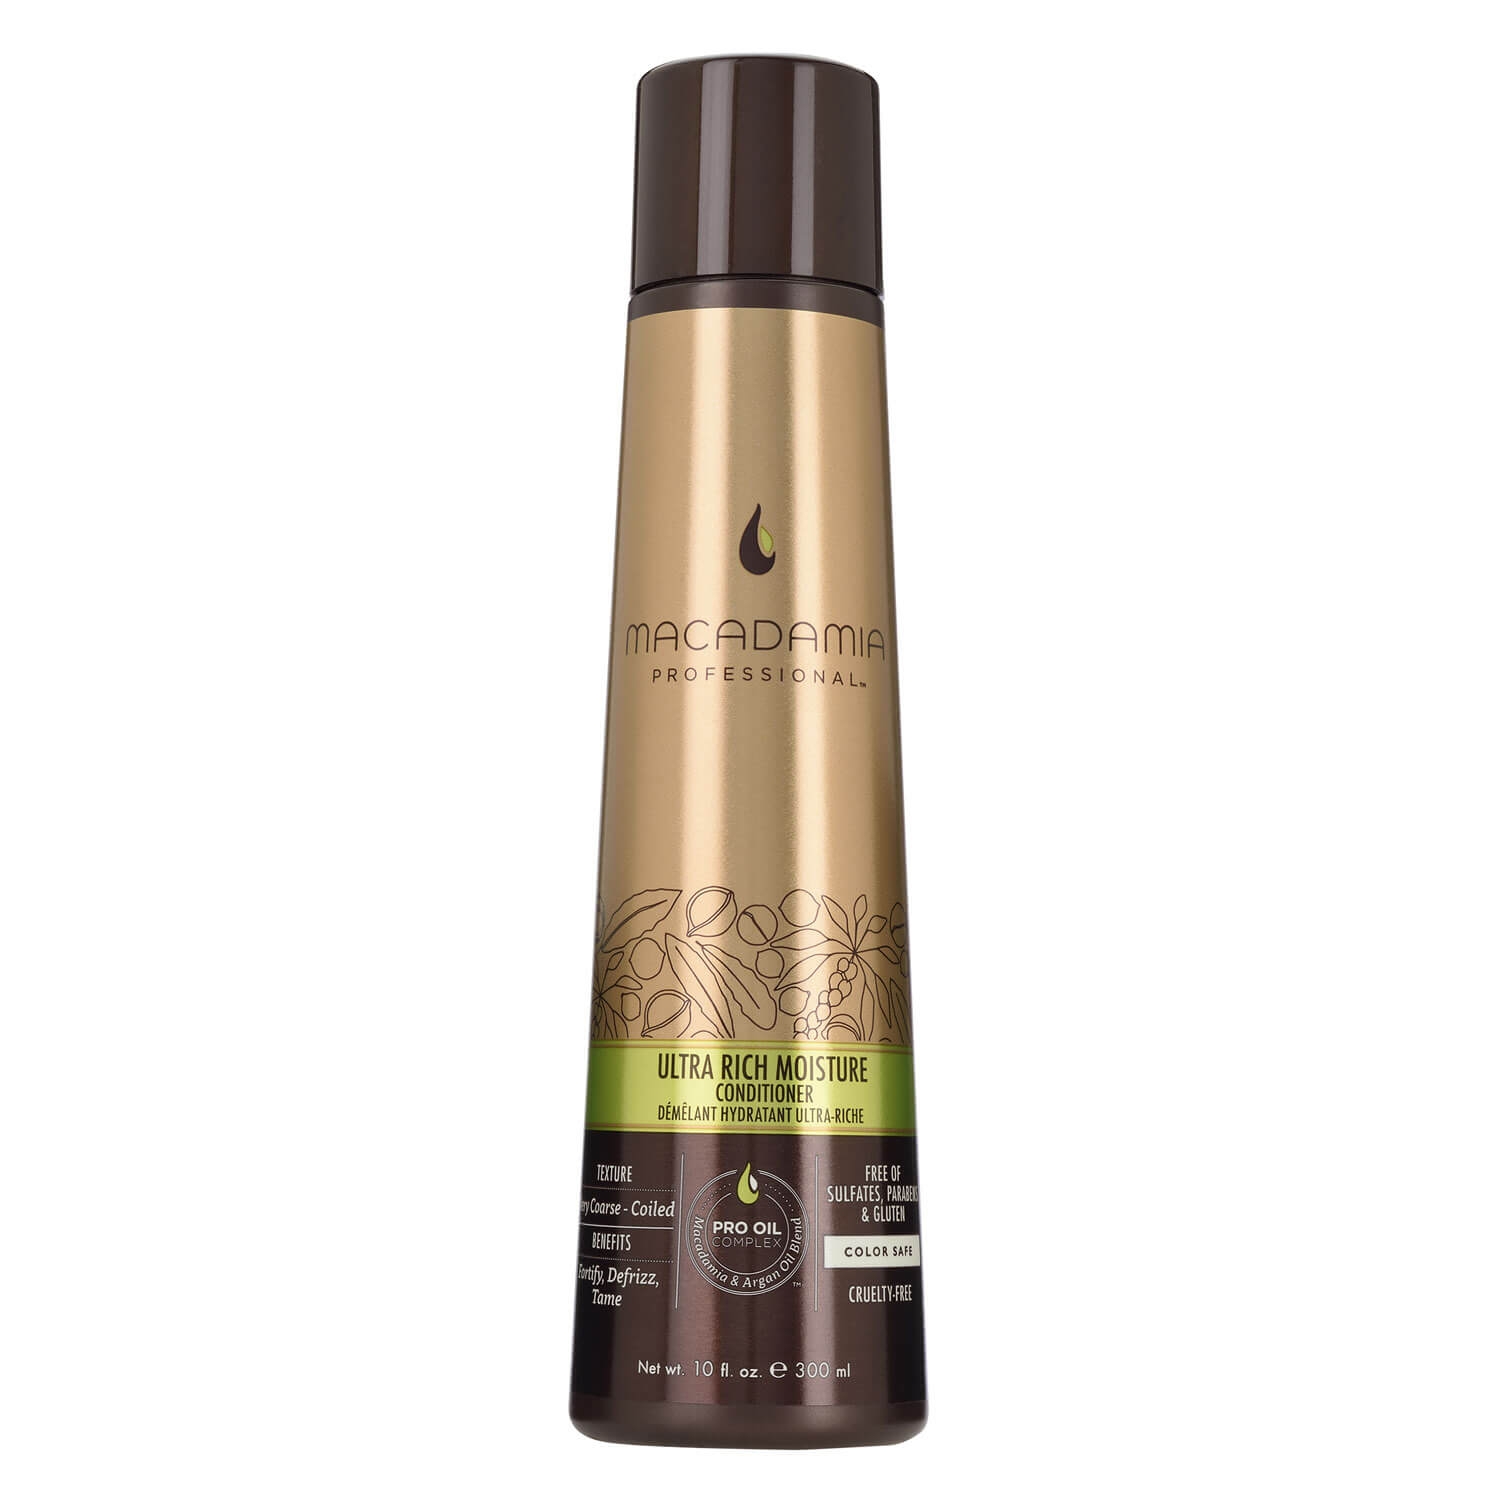 Product image from Macadamia - Ultra Rich Moisture Conditoner